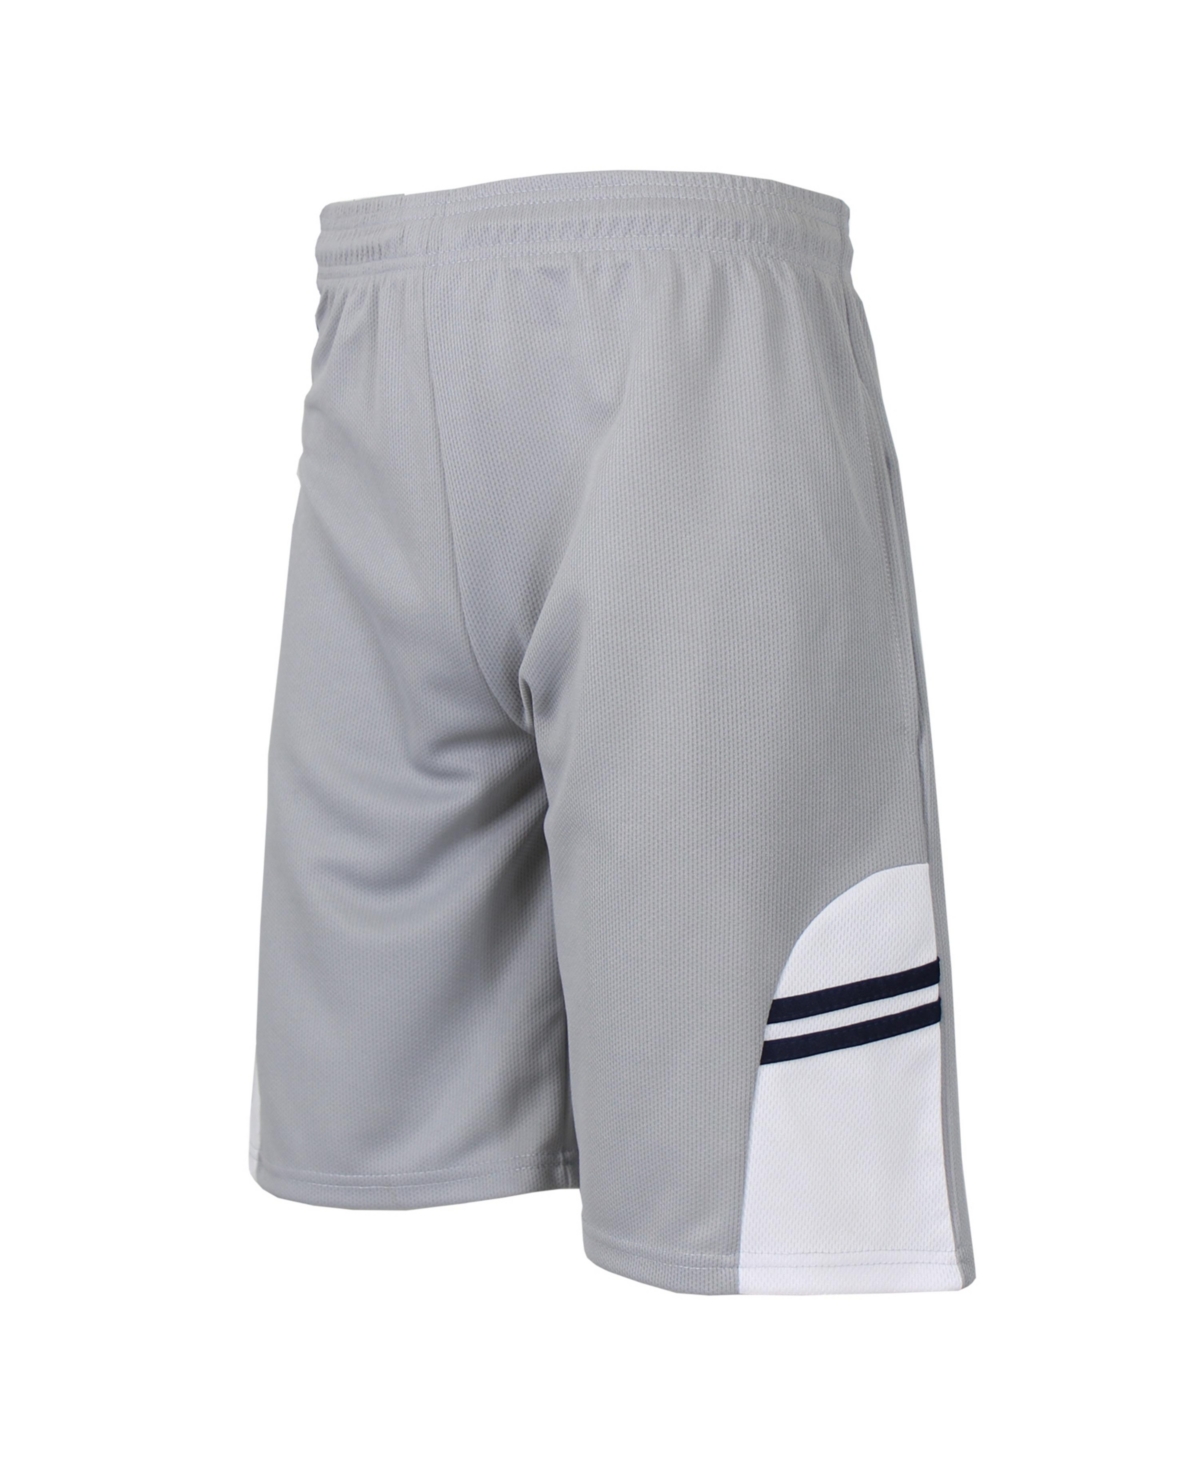 GALAXY BY HARVIC MEN'S MOISTURE WICKING SHORTS WITH SIDE TRIM DESIGN